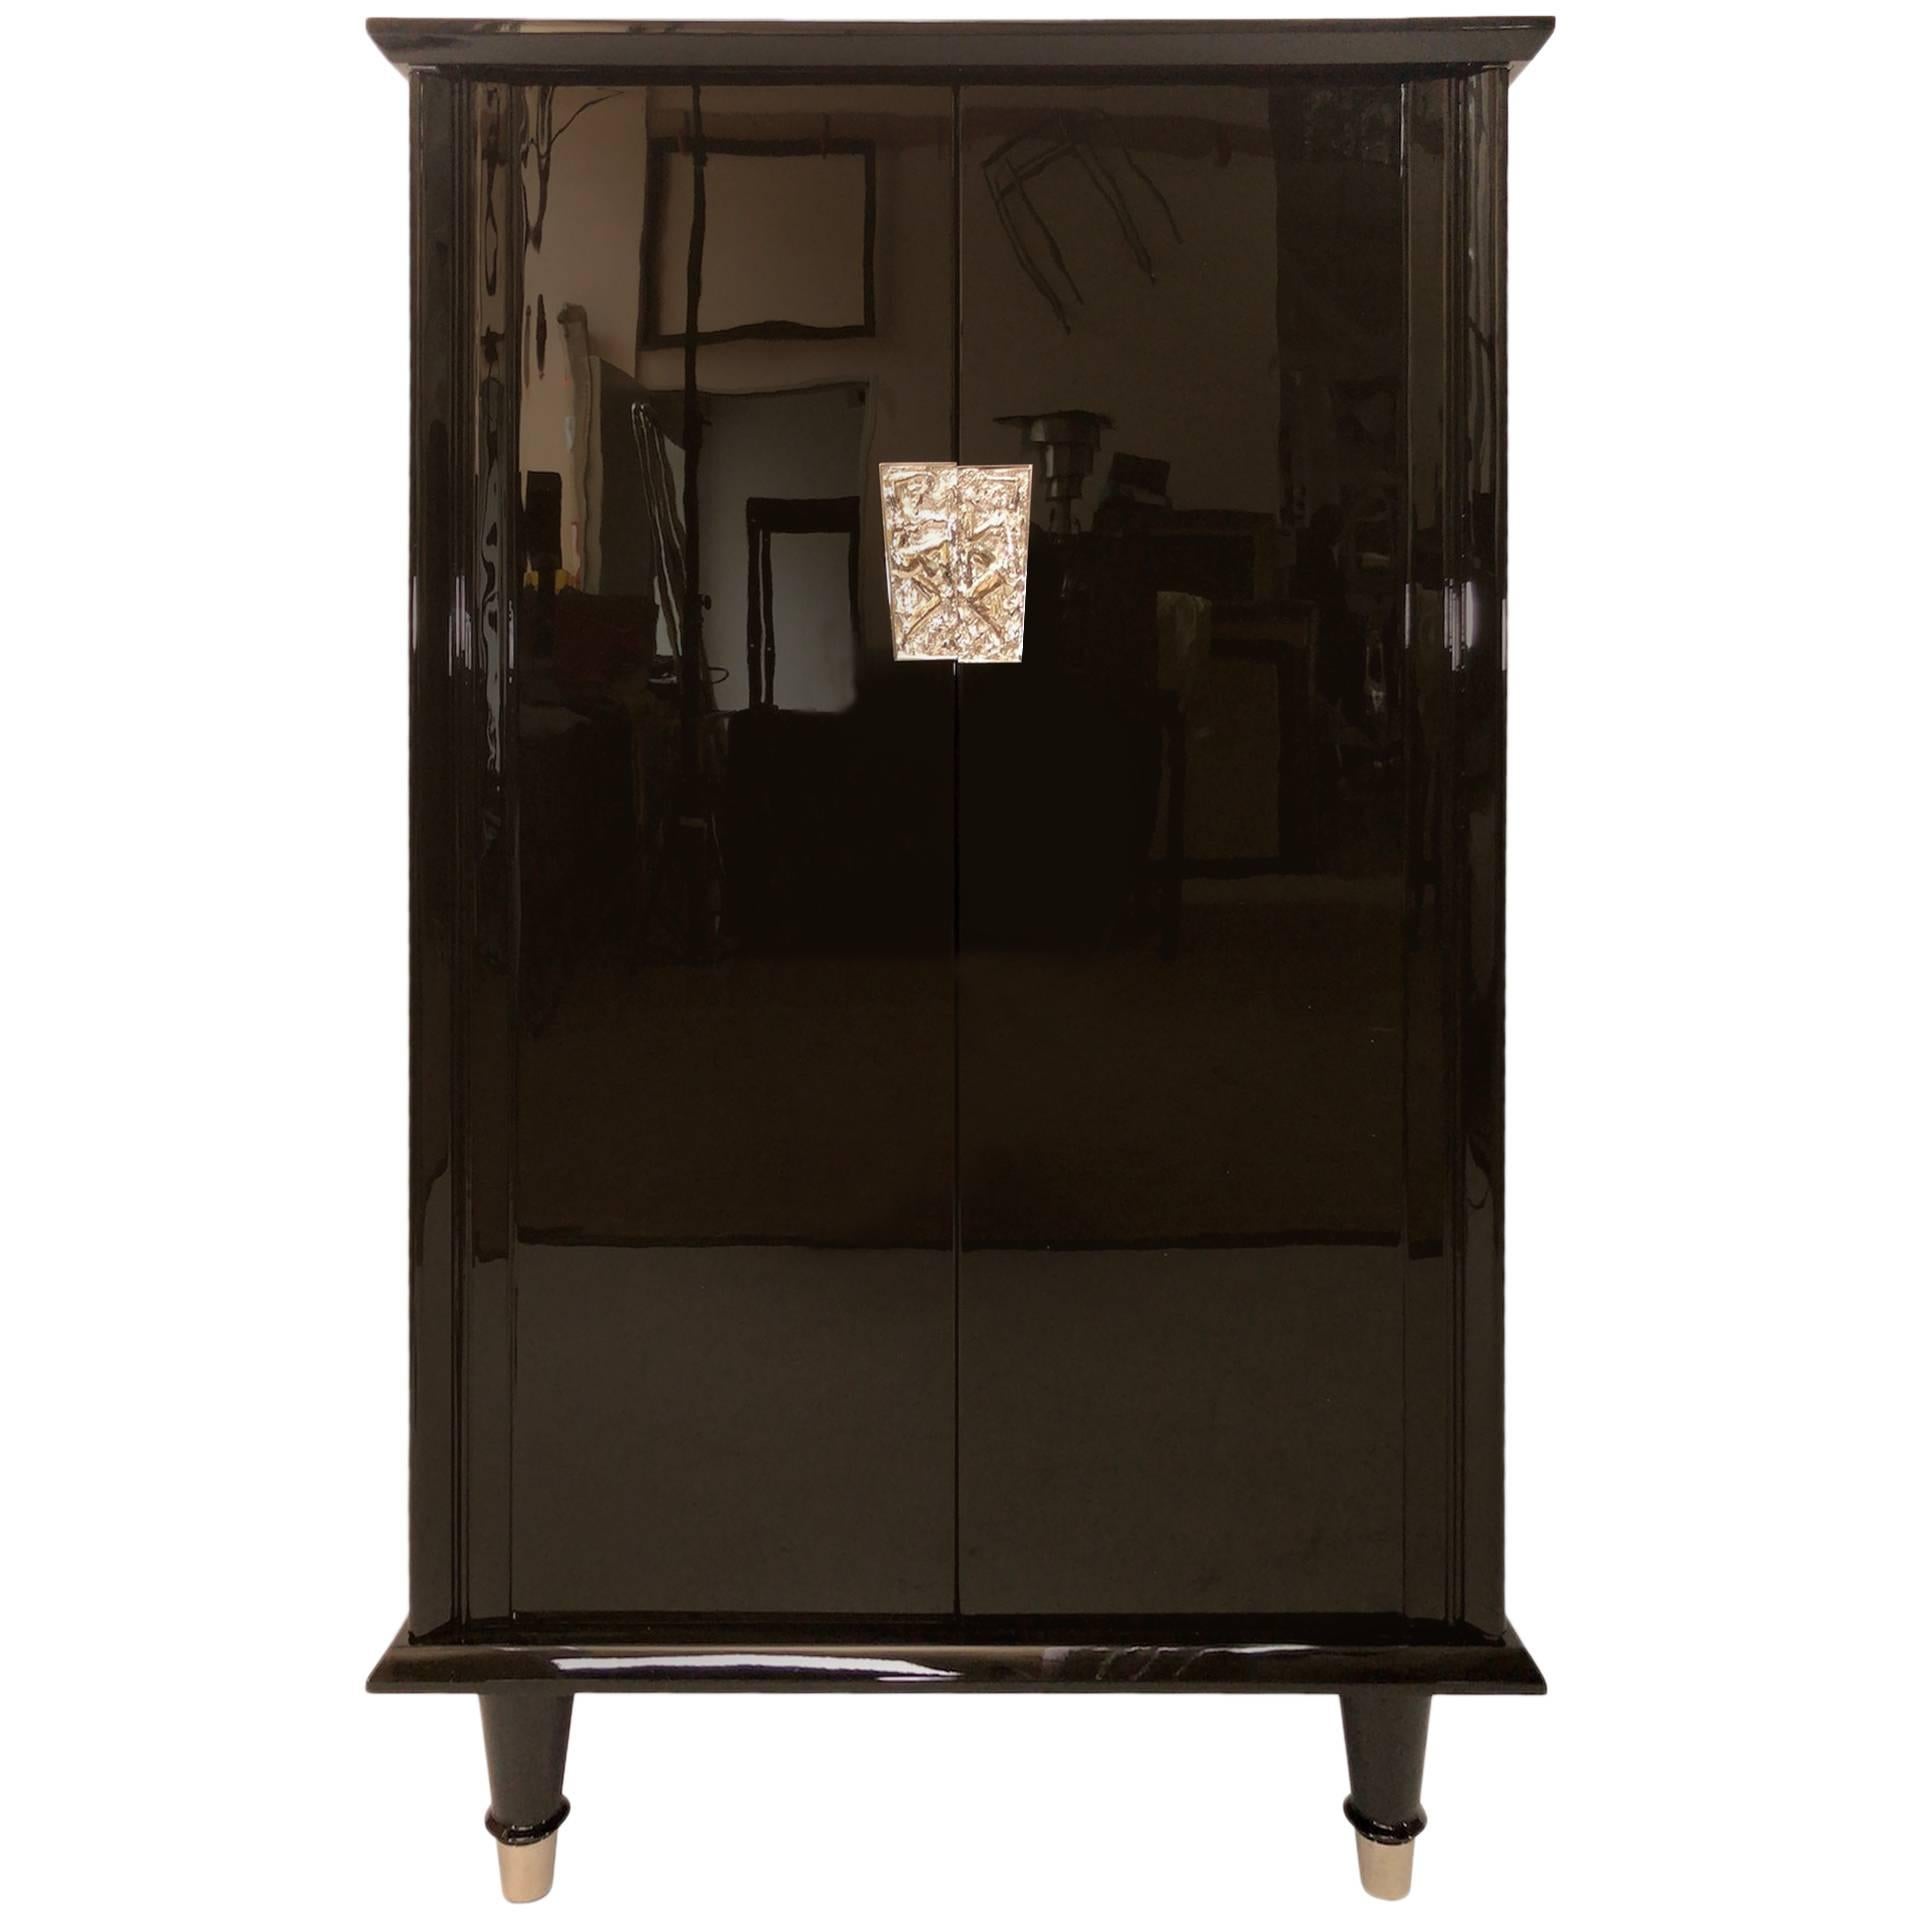 1930s French Art Deco Bar Furniture in Black Lacquer with Nickelled Fittings